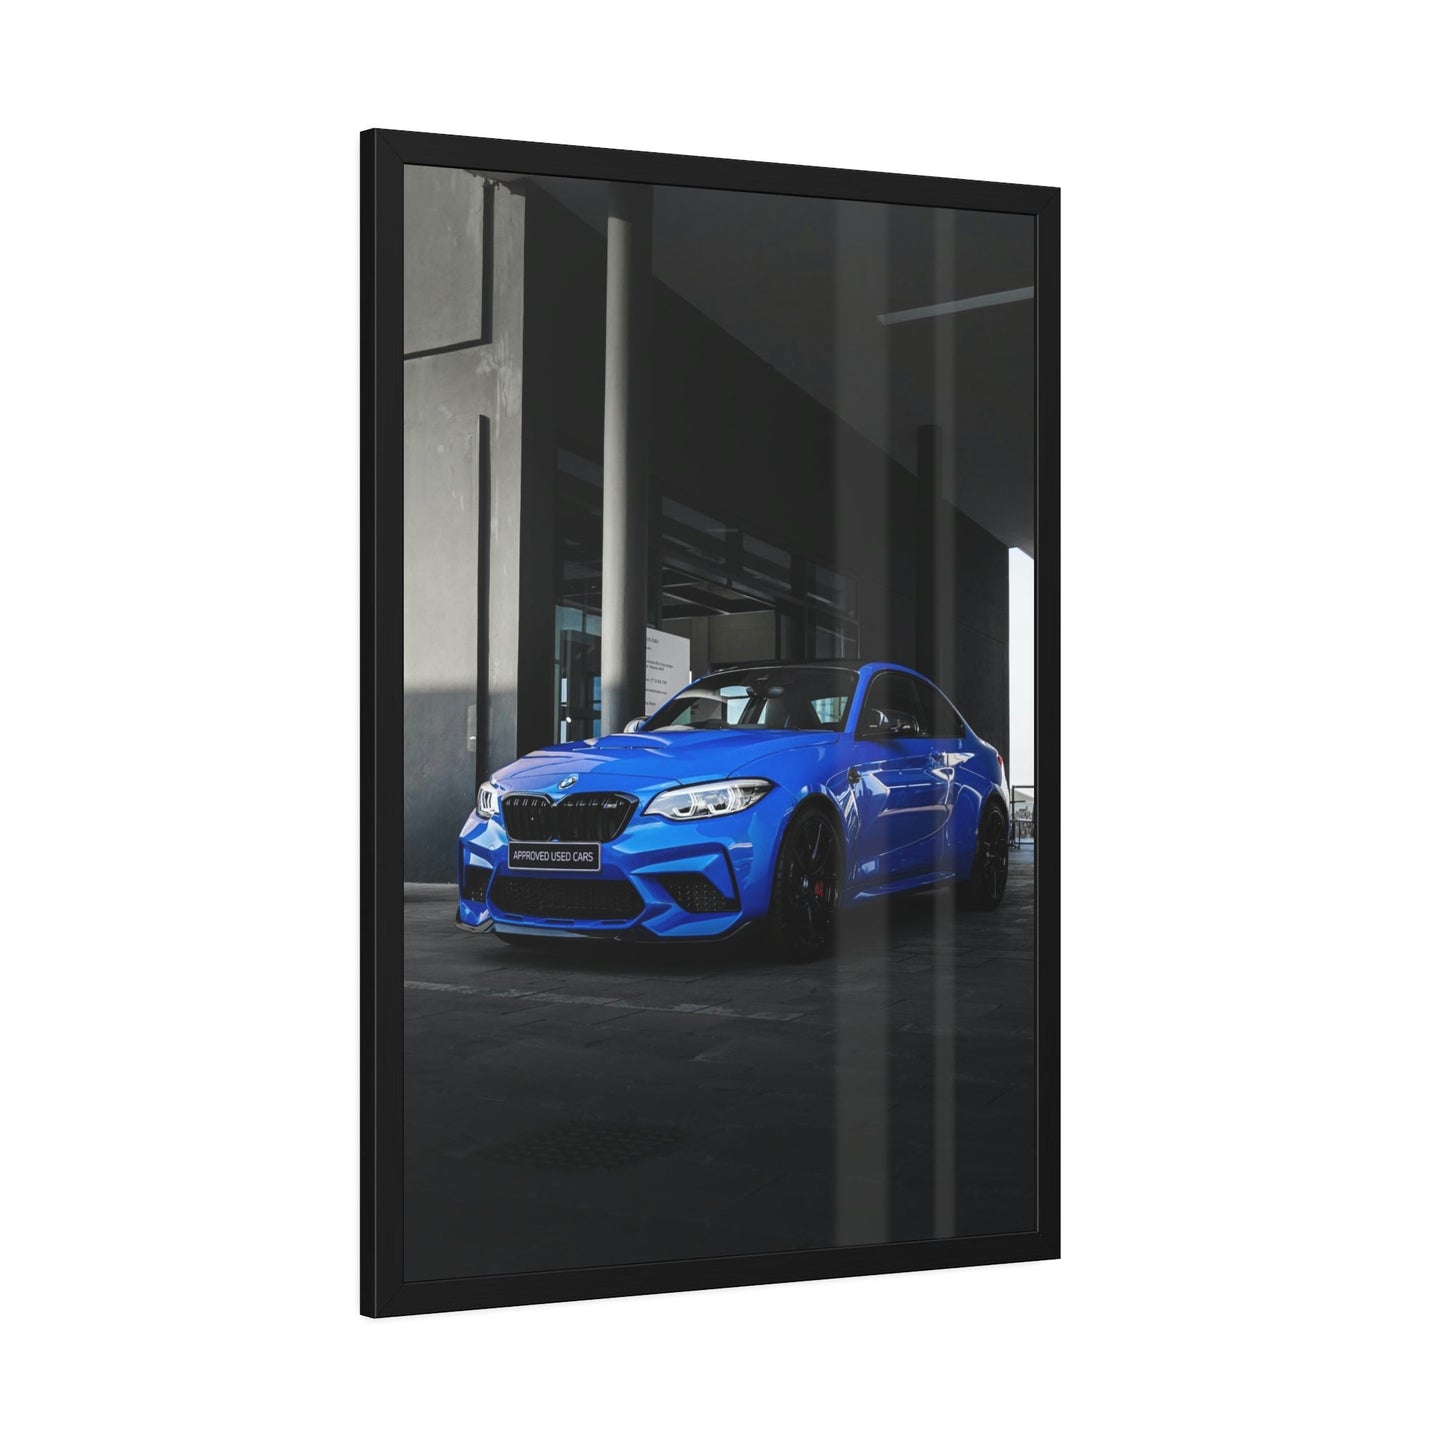 Iconic BMW: Premium Canvas Wall Art for Your Home or Office